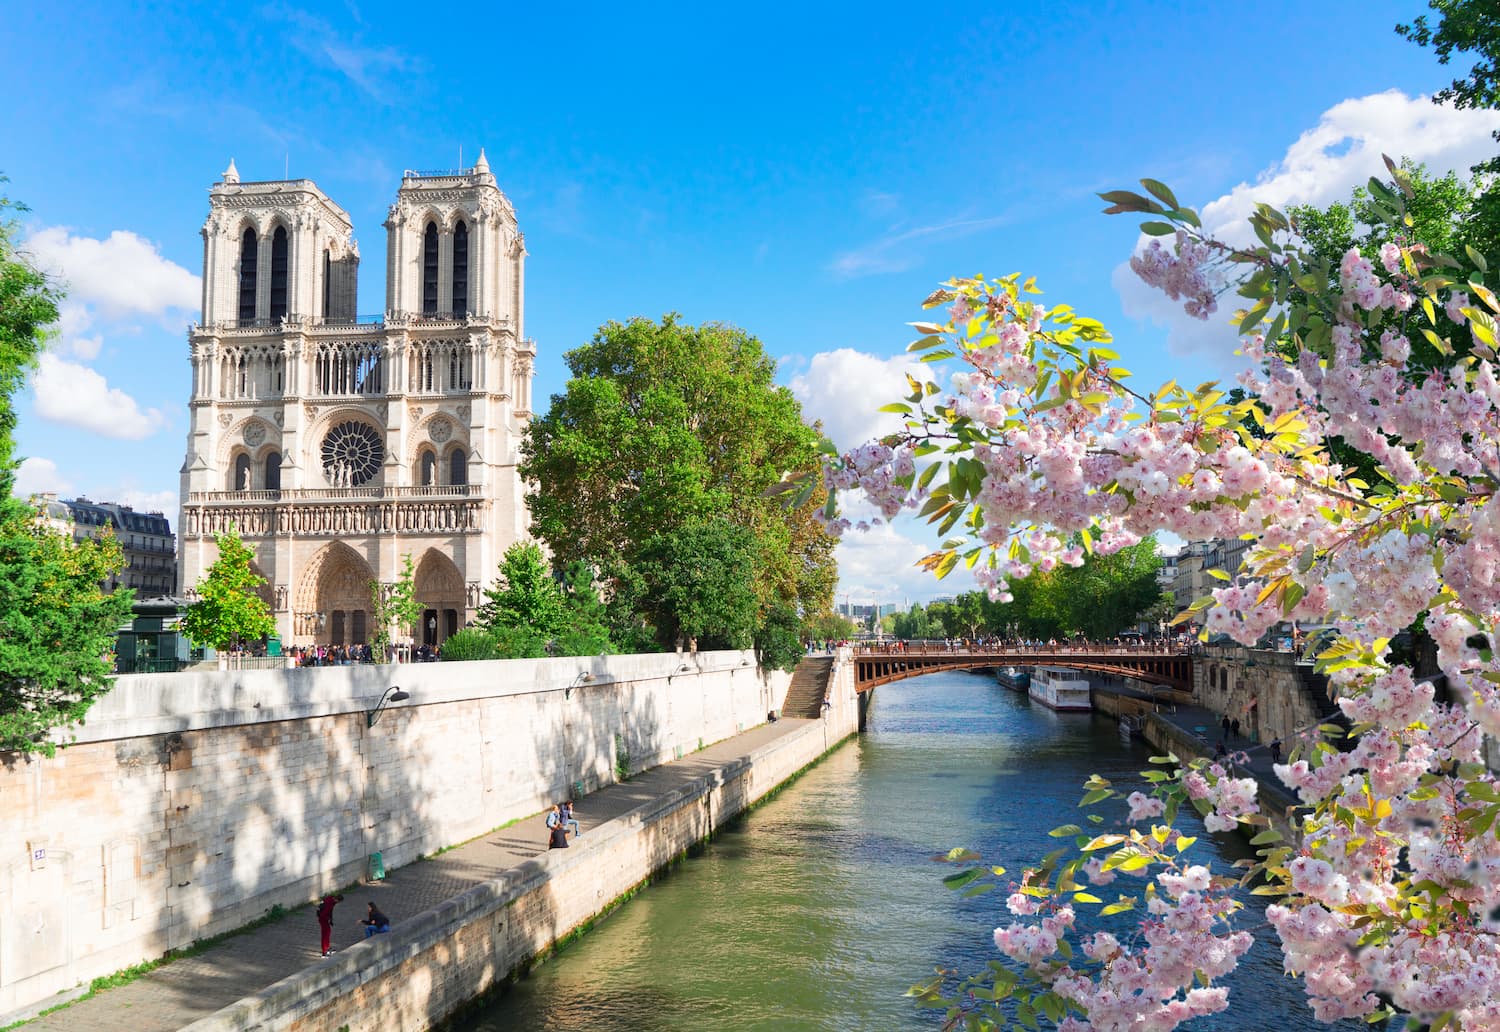 Notre dame cathedral and seine river - Paris hotel near Louvre- hotel des marronniers